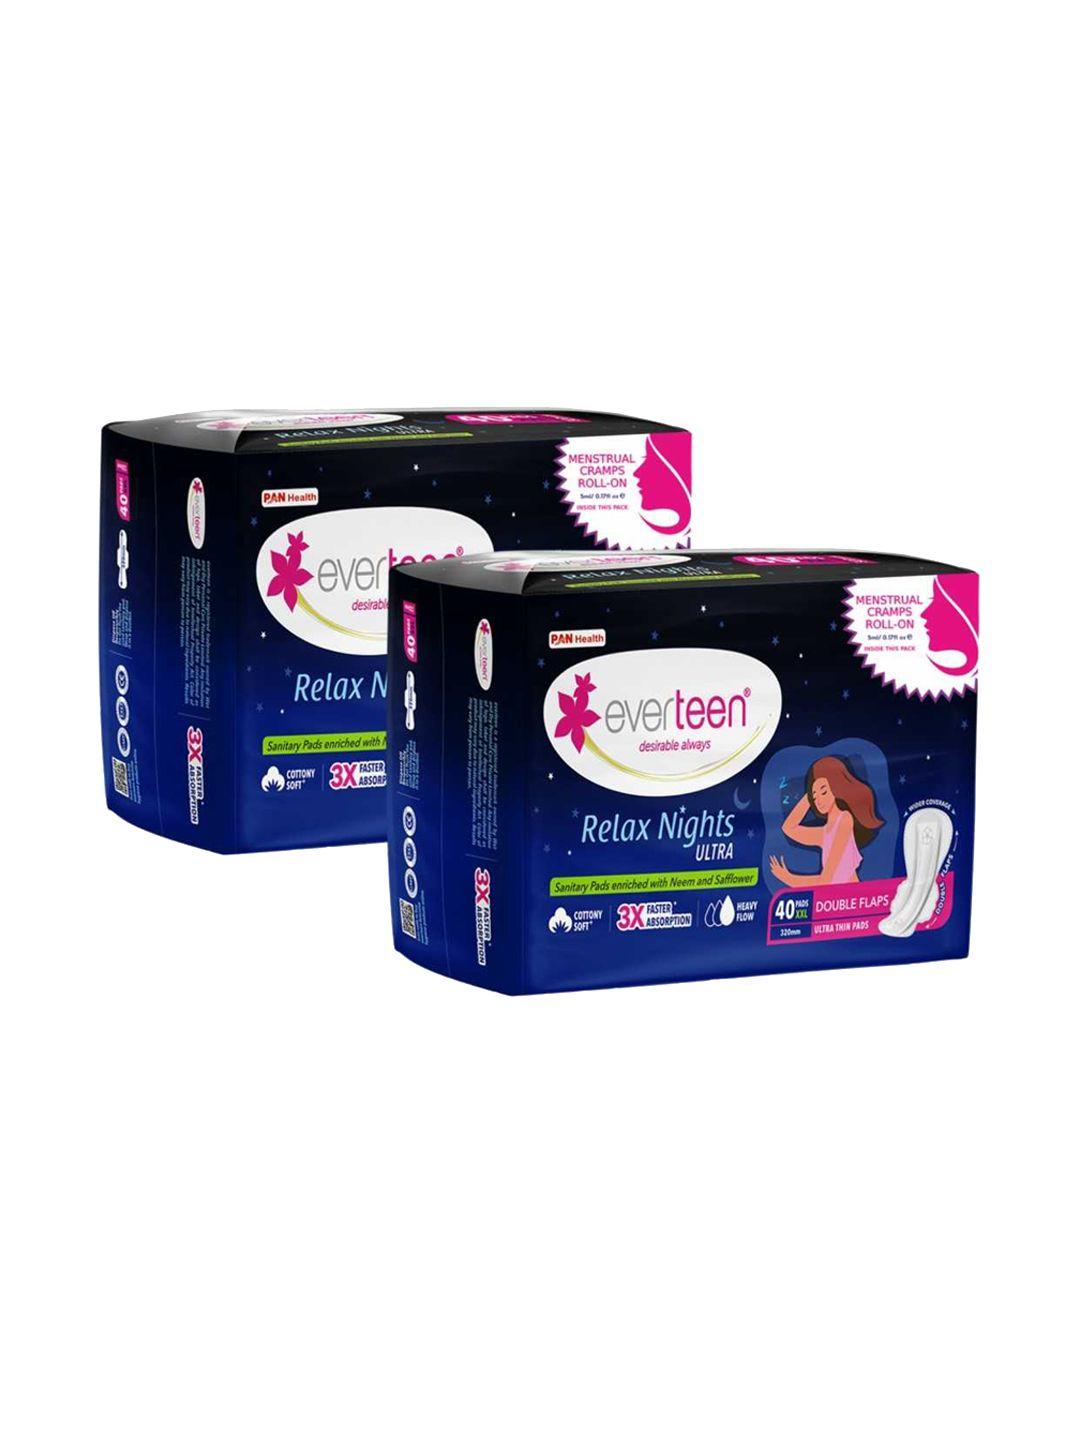 everteen set of 2 relax nights ultra sanitary pads xxl with cramps roll on - 40 pads each